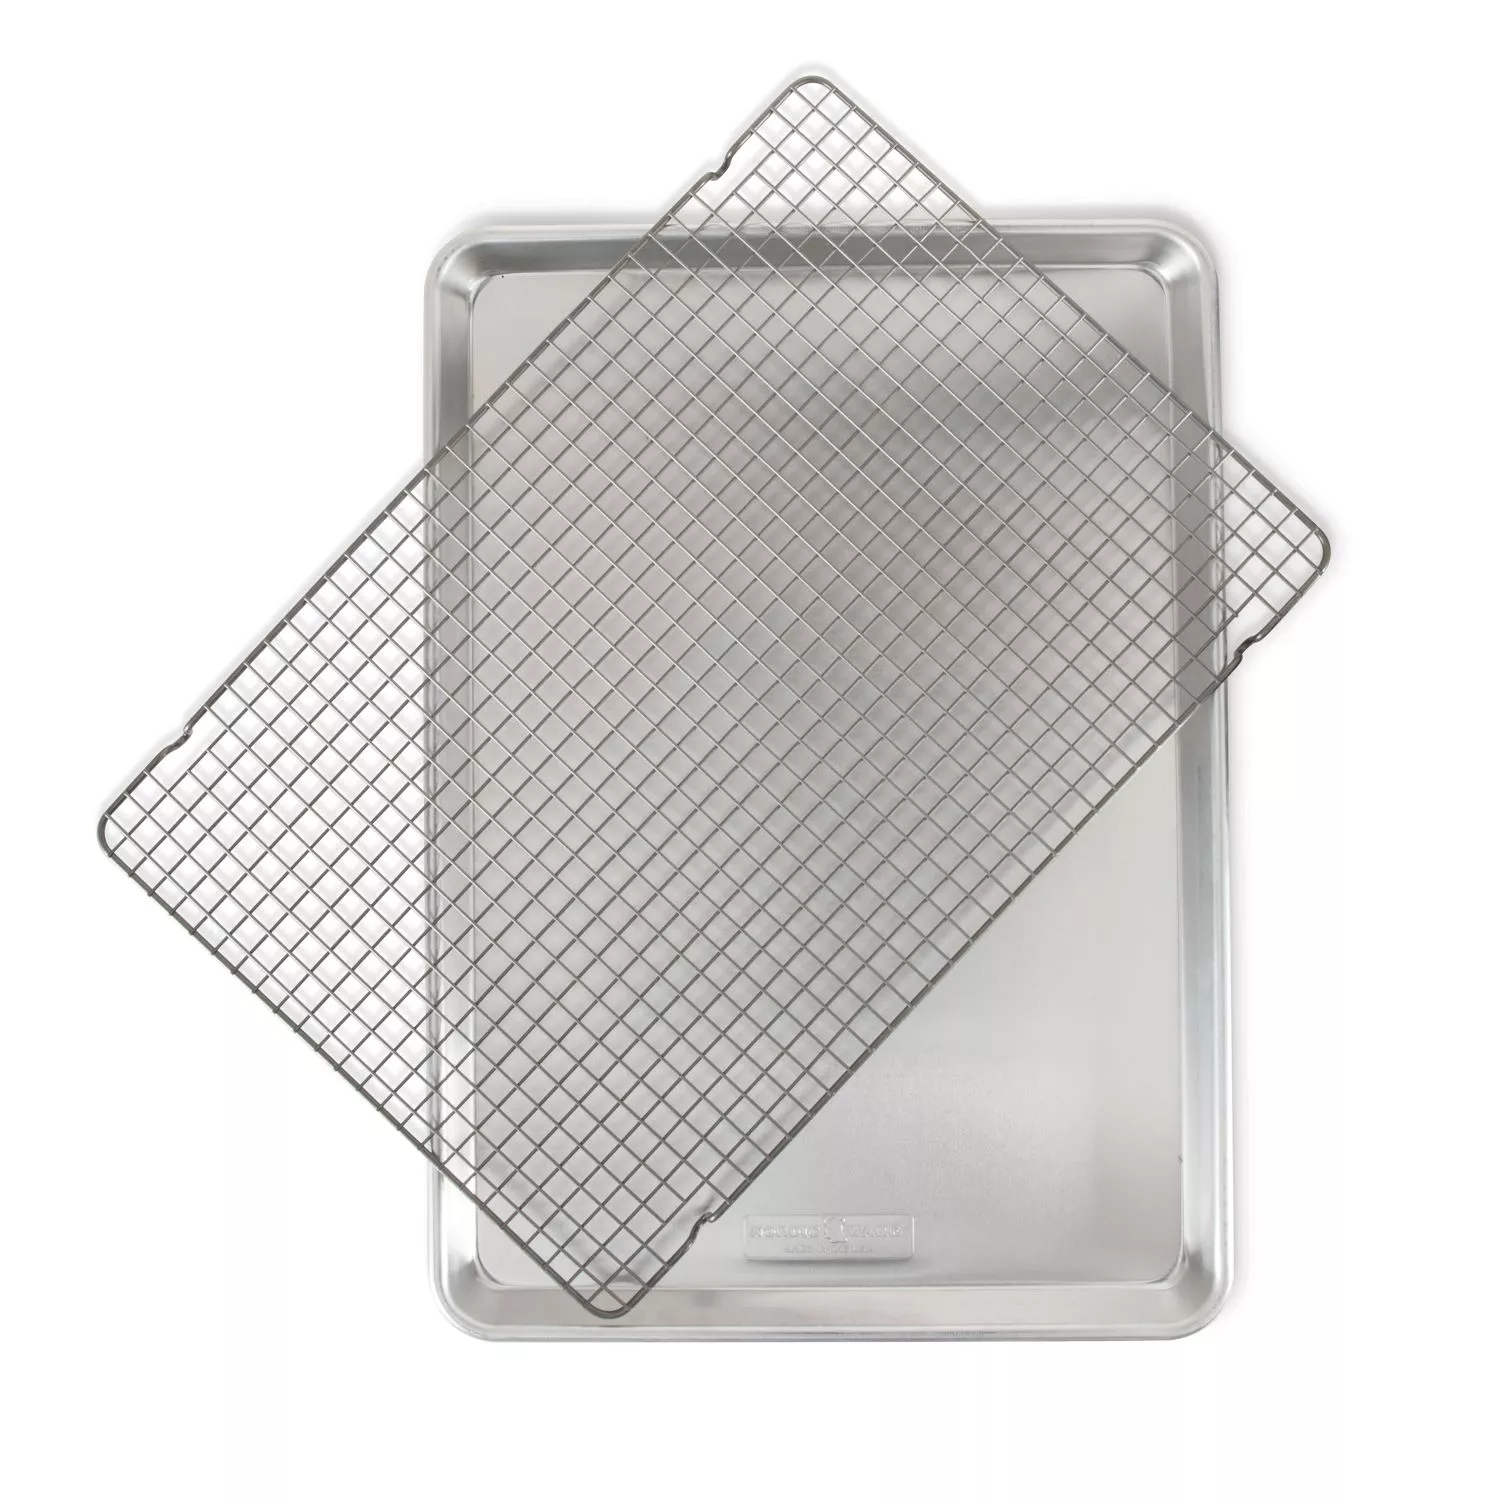 Nordic Ware 2 Piece Half Sheet with Oven-Safe Grid